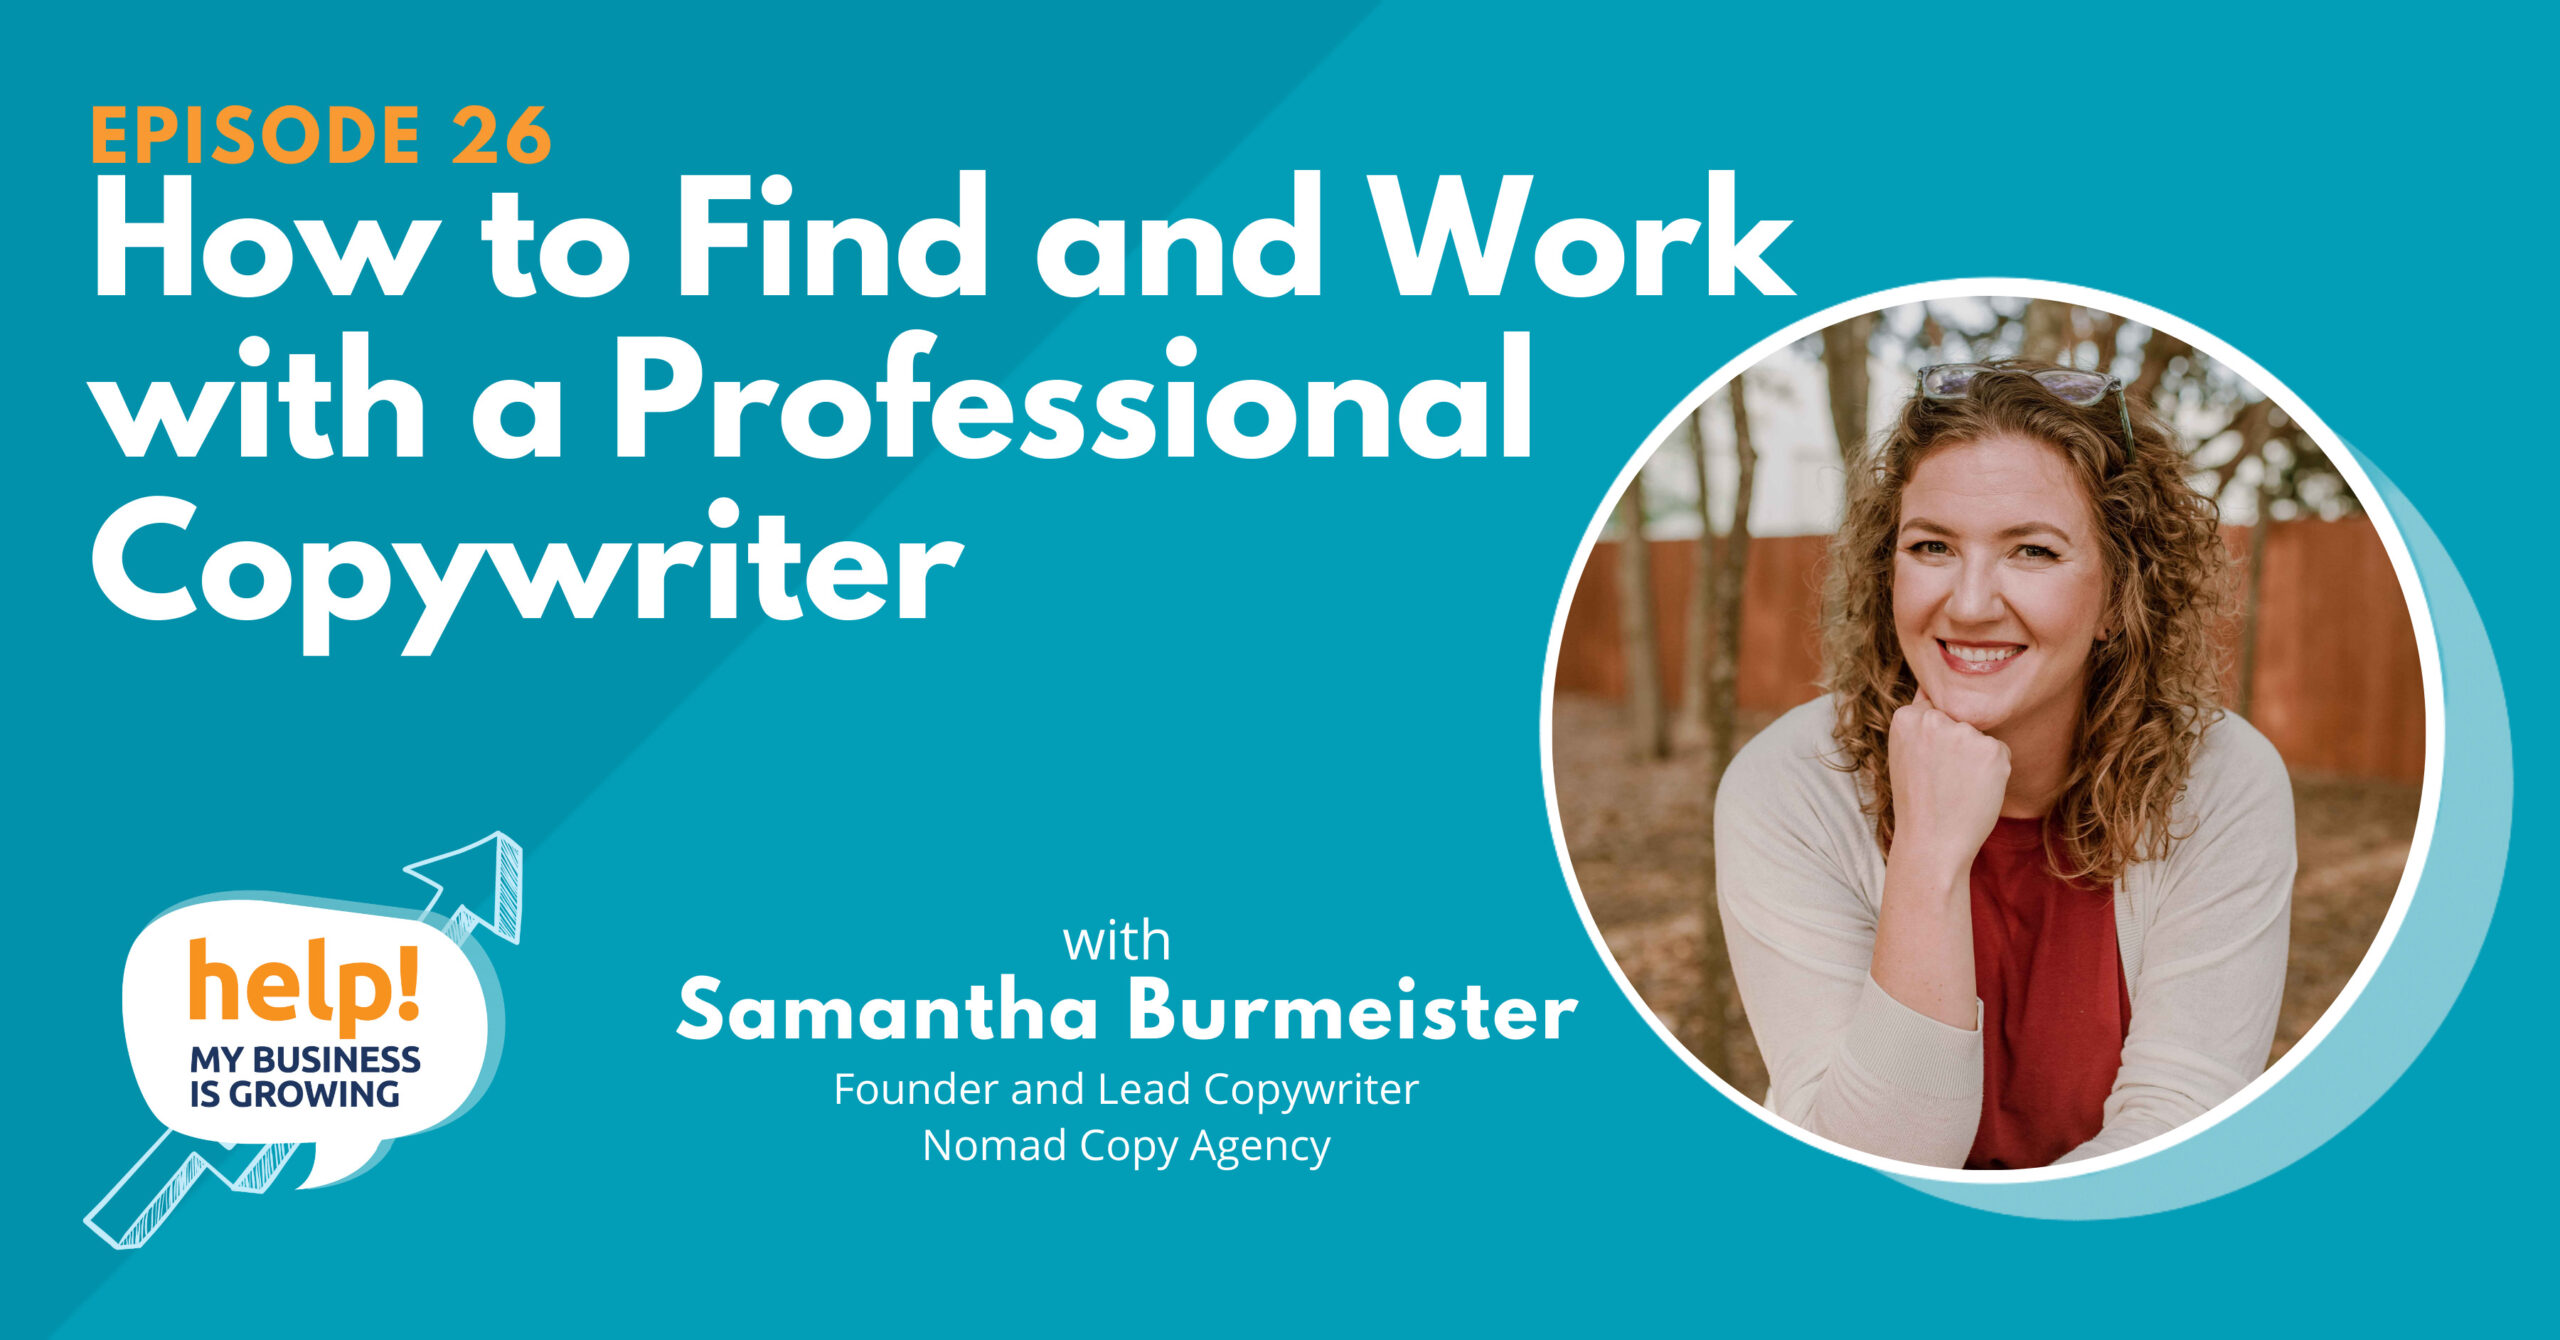 How to Find and Work with a Professional Copywriter